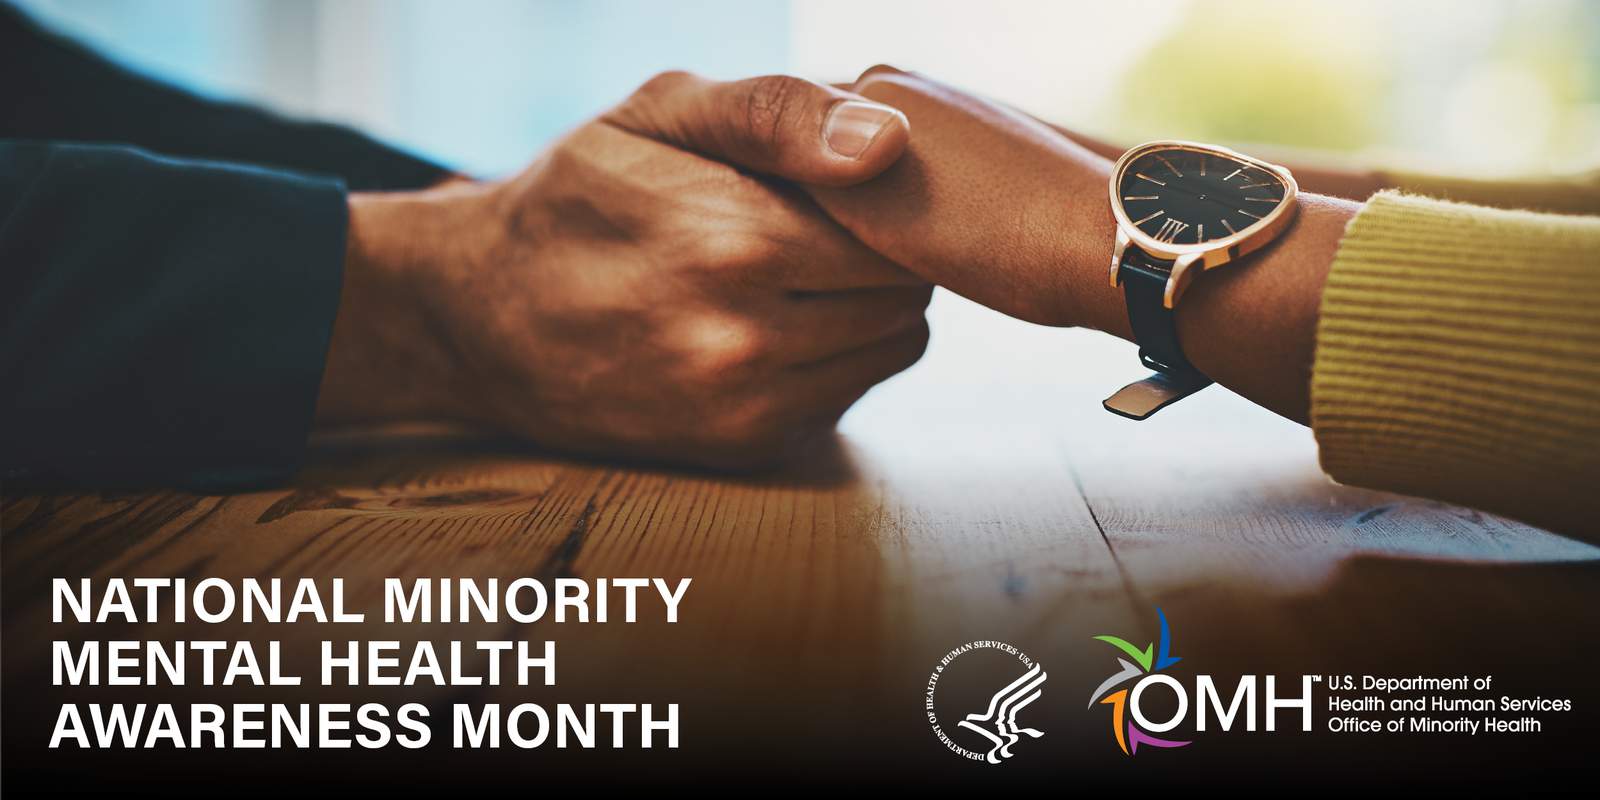 July is Minority Mental Health Awareness Month. Heres how you can find help and show support